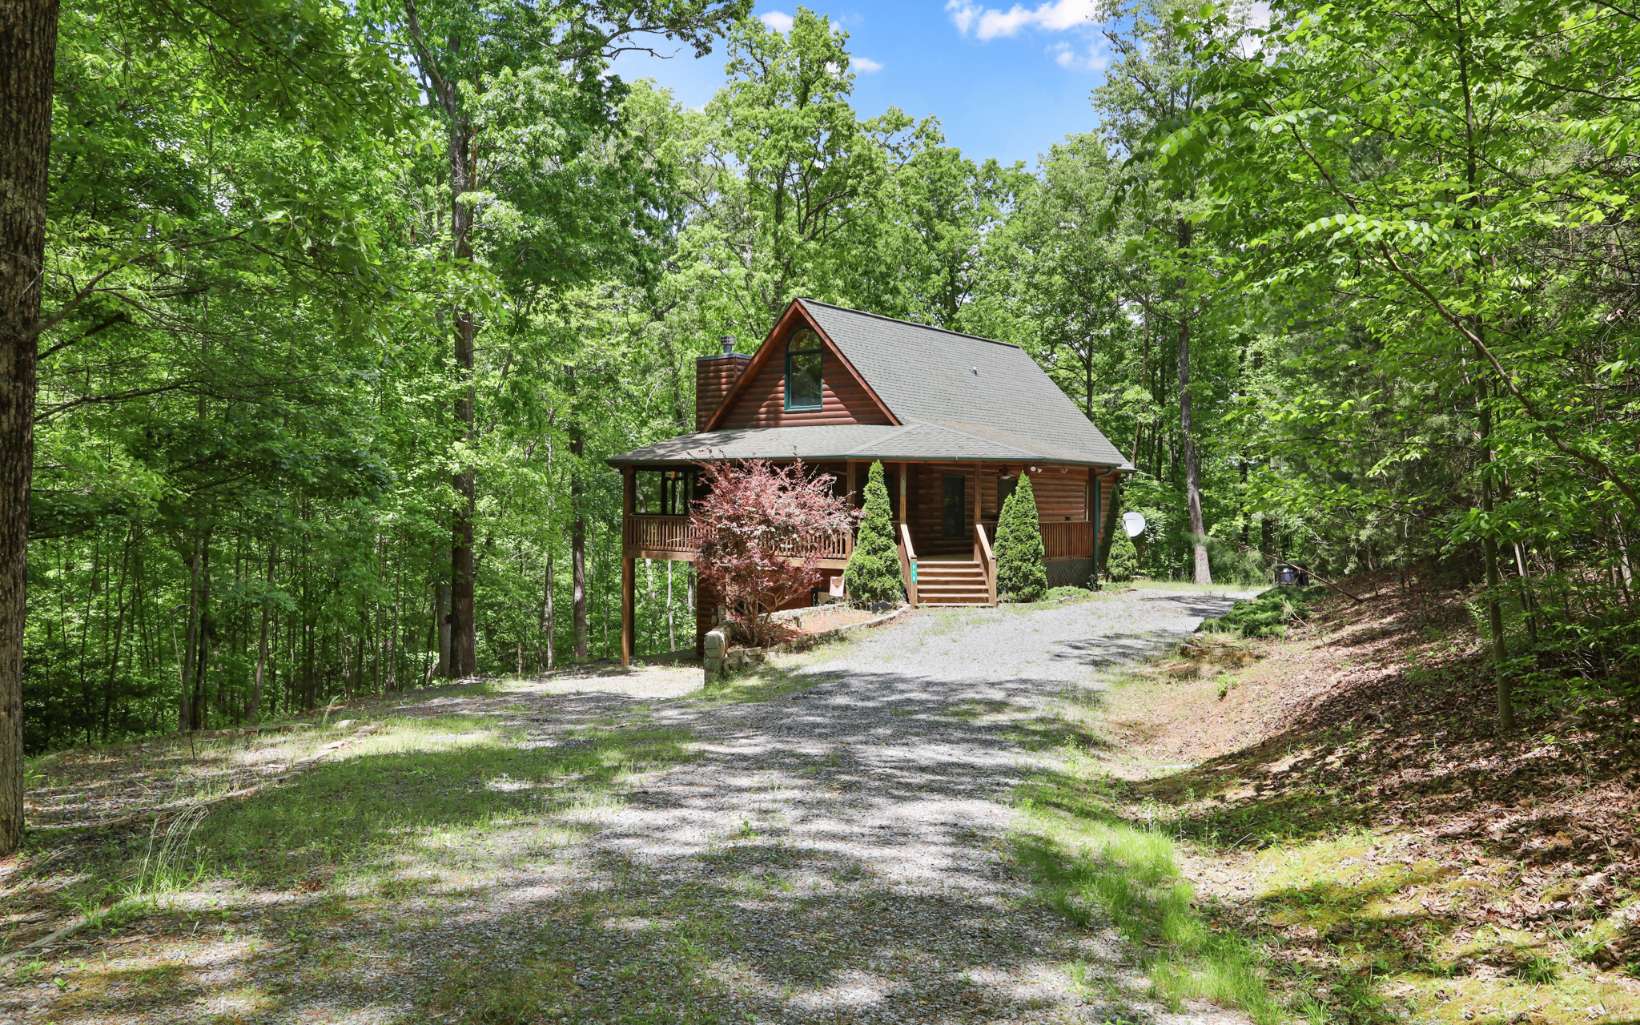 PRICE IMPROVEMENT! PRICED TO SELL! Here's your opportunity to own a Real Log Cabin sitting on 2.02 ac and FURNISHED! 4 bdr plus a sleeping Loft, 3 baths, open floor plan w/ great rm, kit and dining rm. Gorgeous dry-stacked rock fireplace, hardwood floors throughout, screened in porch, wrap around deck, laundry on main level, basement garage for parking or storage and wired for back up generator ! Tons of parking space and seasonal Mtn views! Great rental potential or perfect investment for weekend get-a-ways ! Super close to fishing on Fighting town Creek, shopping in downtown McCaysville and Blue Ridge, boating on Blue Ridge Lake, Hiking on Aska Adventure Trails as well as rafting down the Ocoee Whitewater River or Gambling at the Casino in Murphy NC! Perfect location! It wont last long! Give me a call!